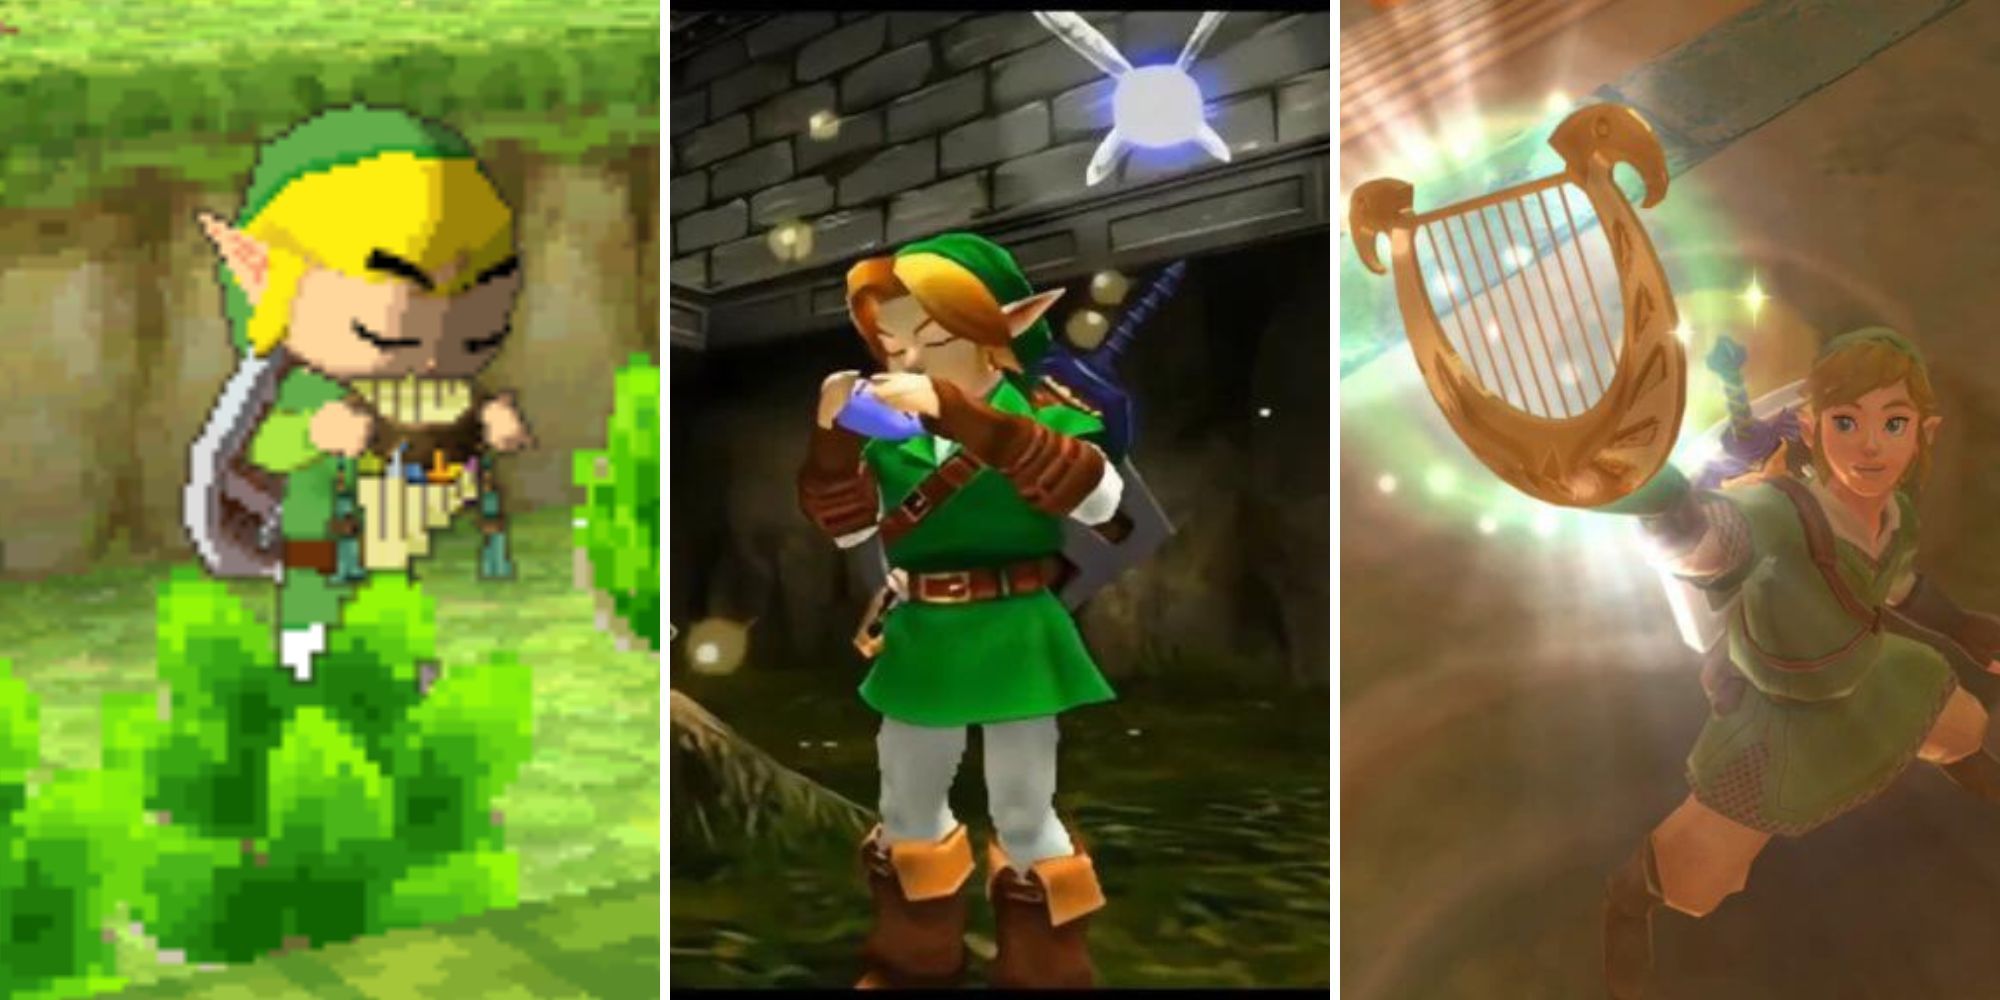 Toon Link plays the Spirit Flute, Link plays the Ocarina of Time, Link holds up the Goddess's Harp